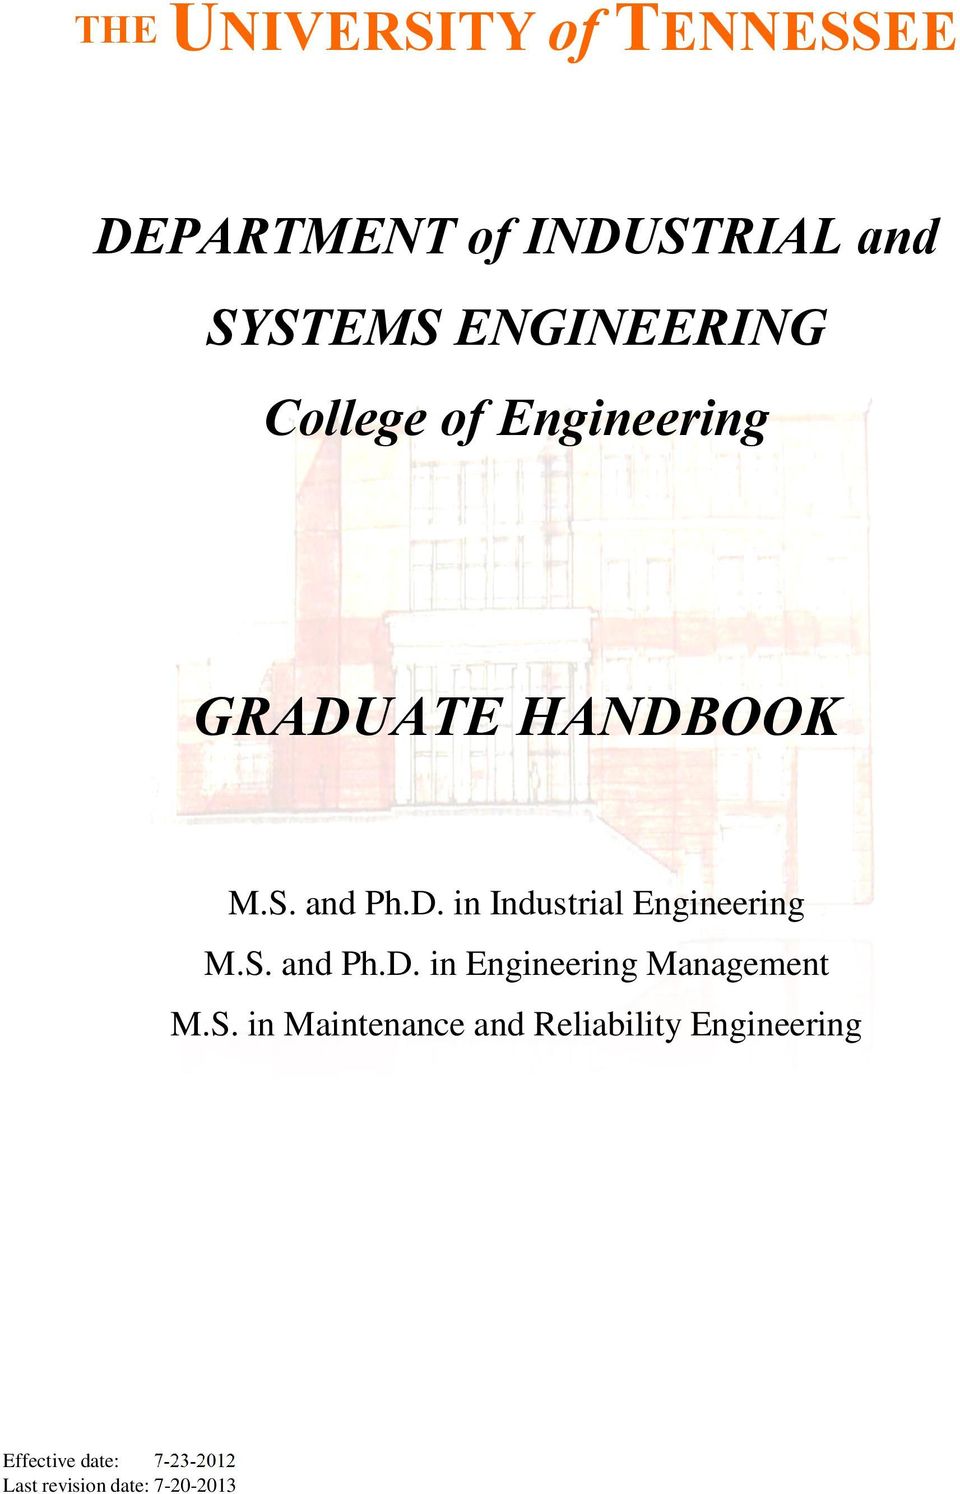 S. and Ph.D. in Engineering Management M.S. in Maintenance and Reliability